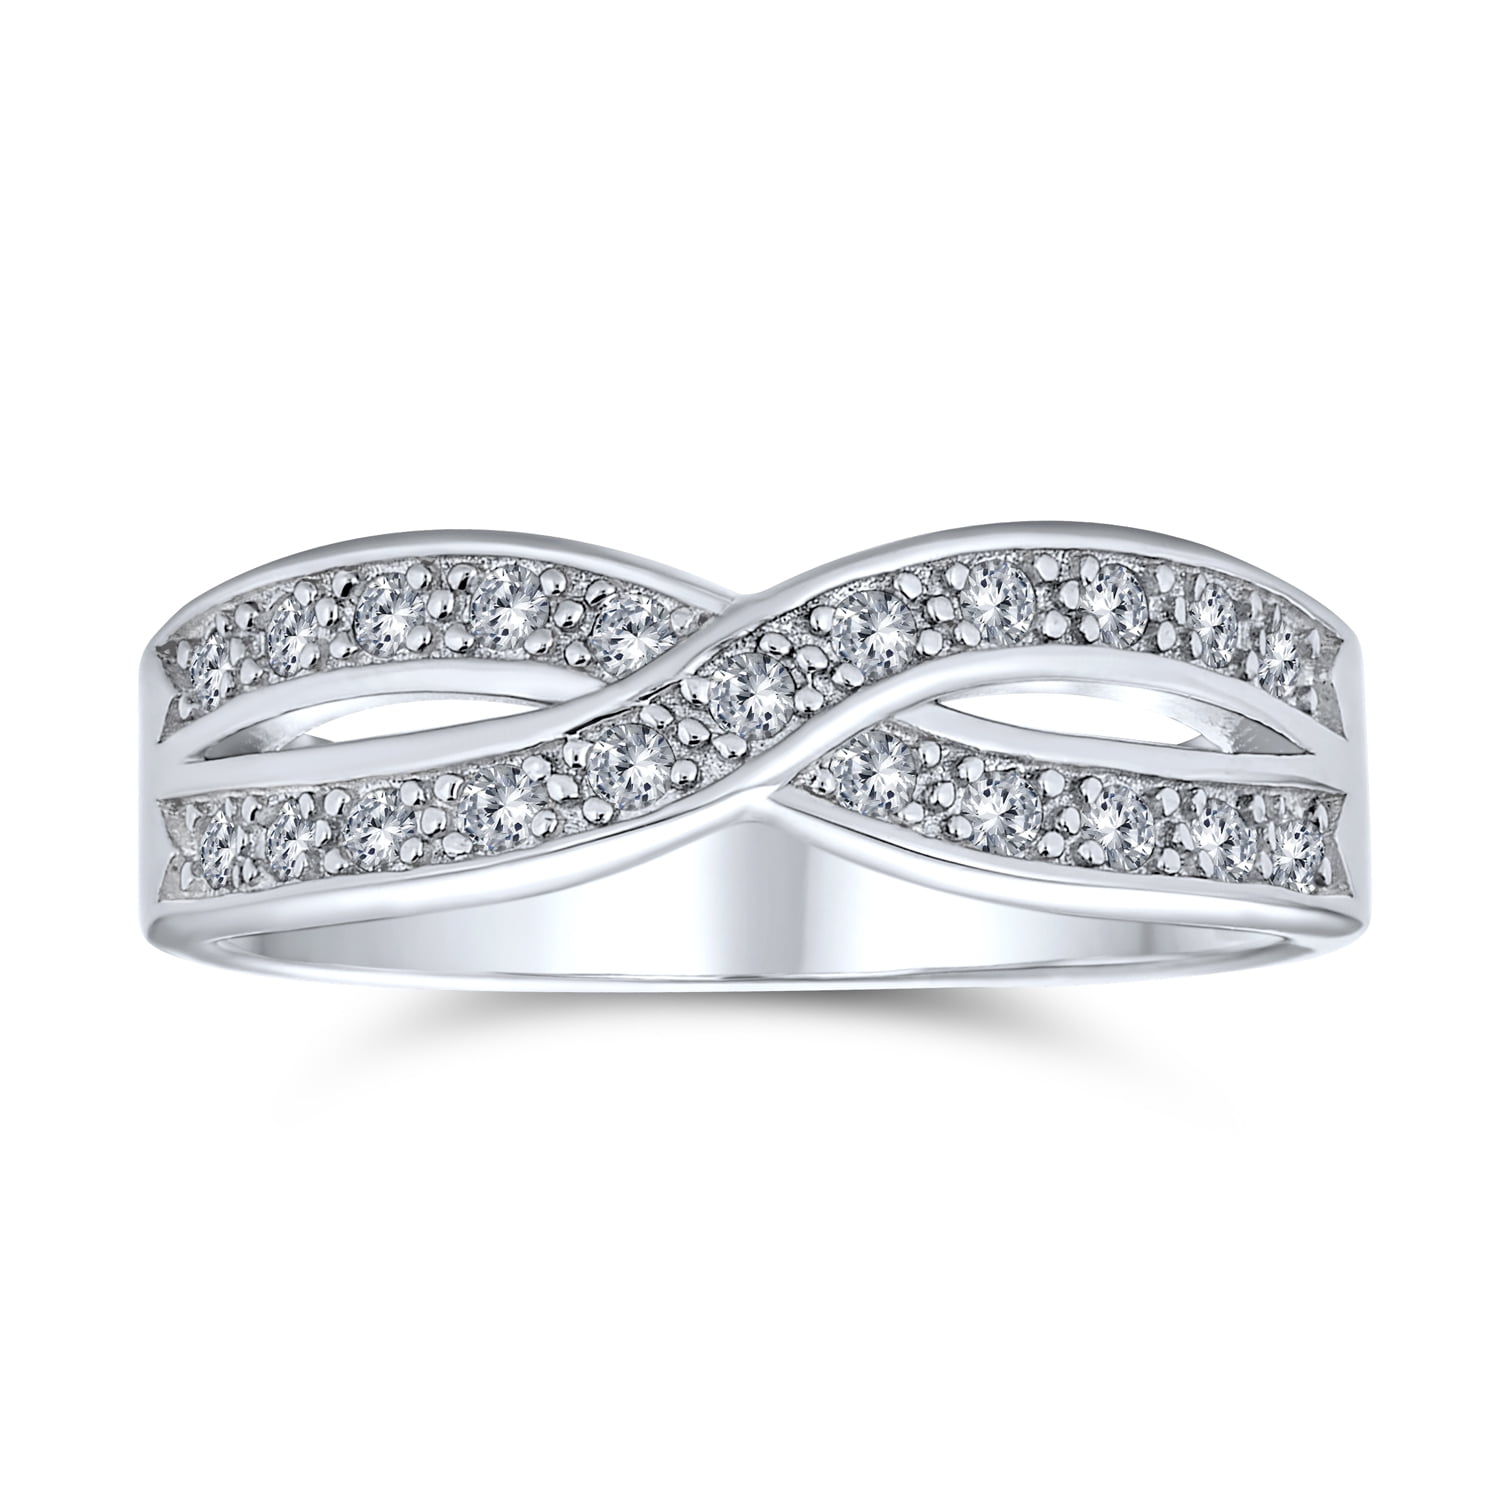 Women's Sterling Silver Pave CZ Criss Cross Wedding Engagement Band Ring